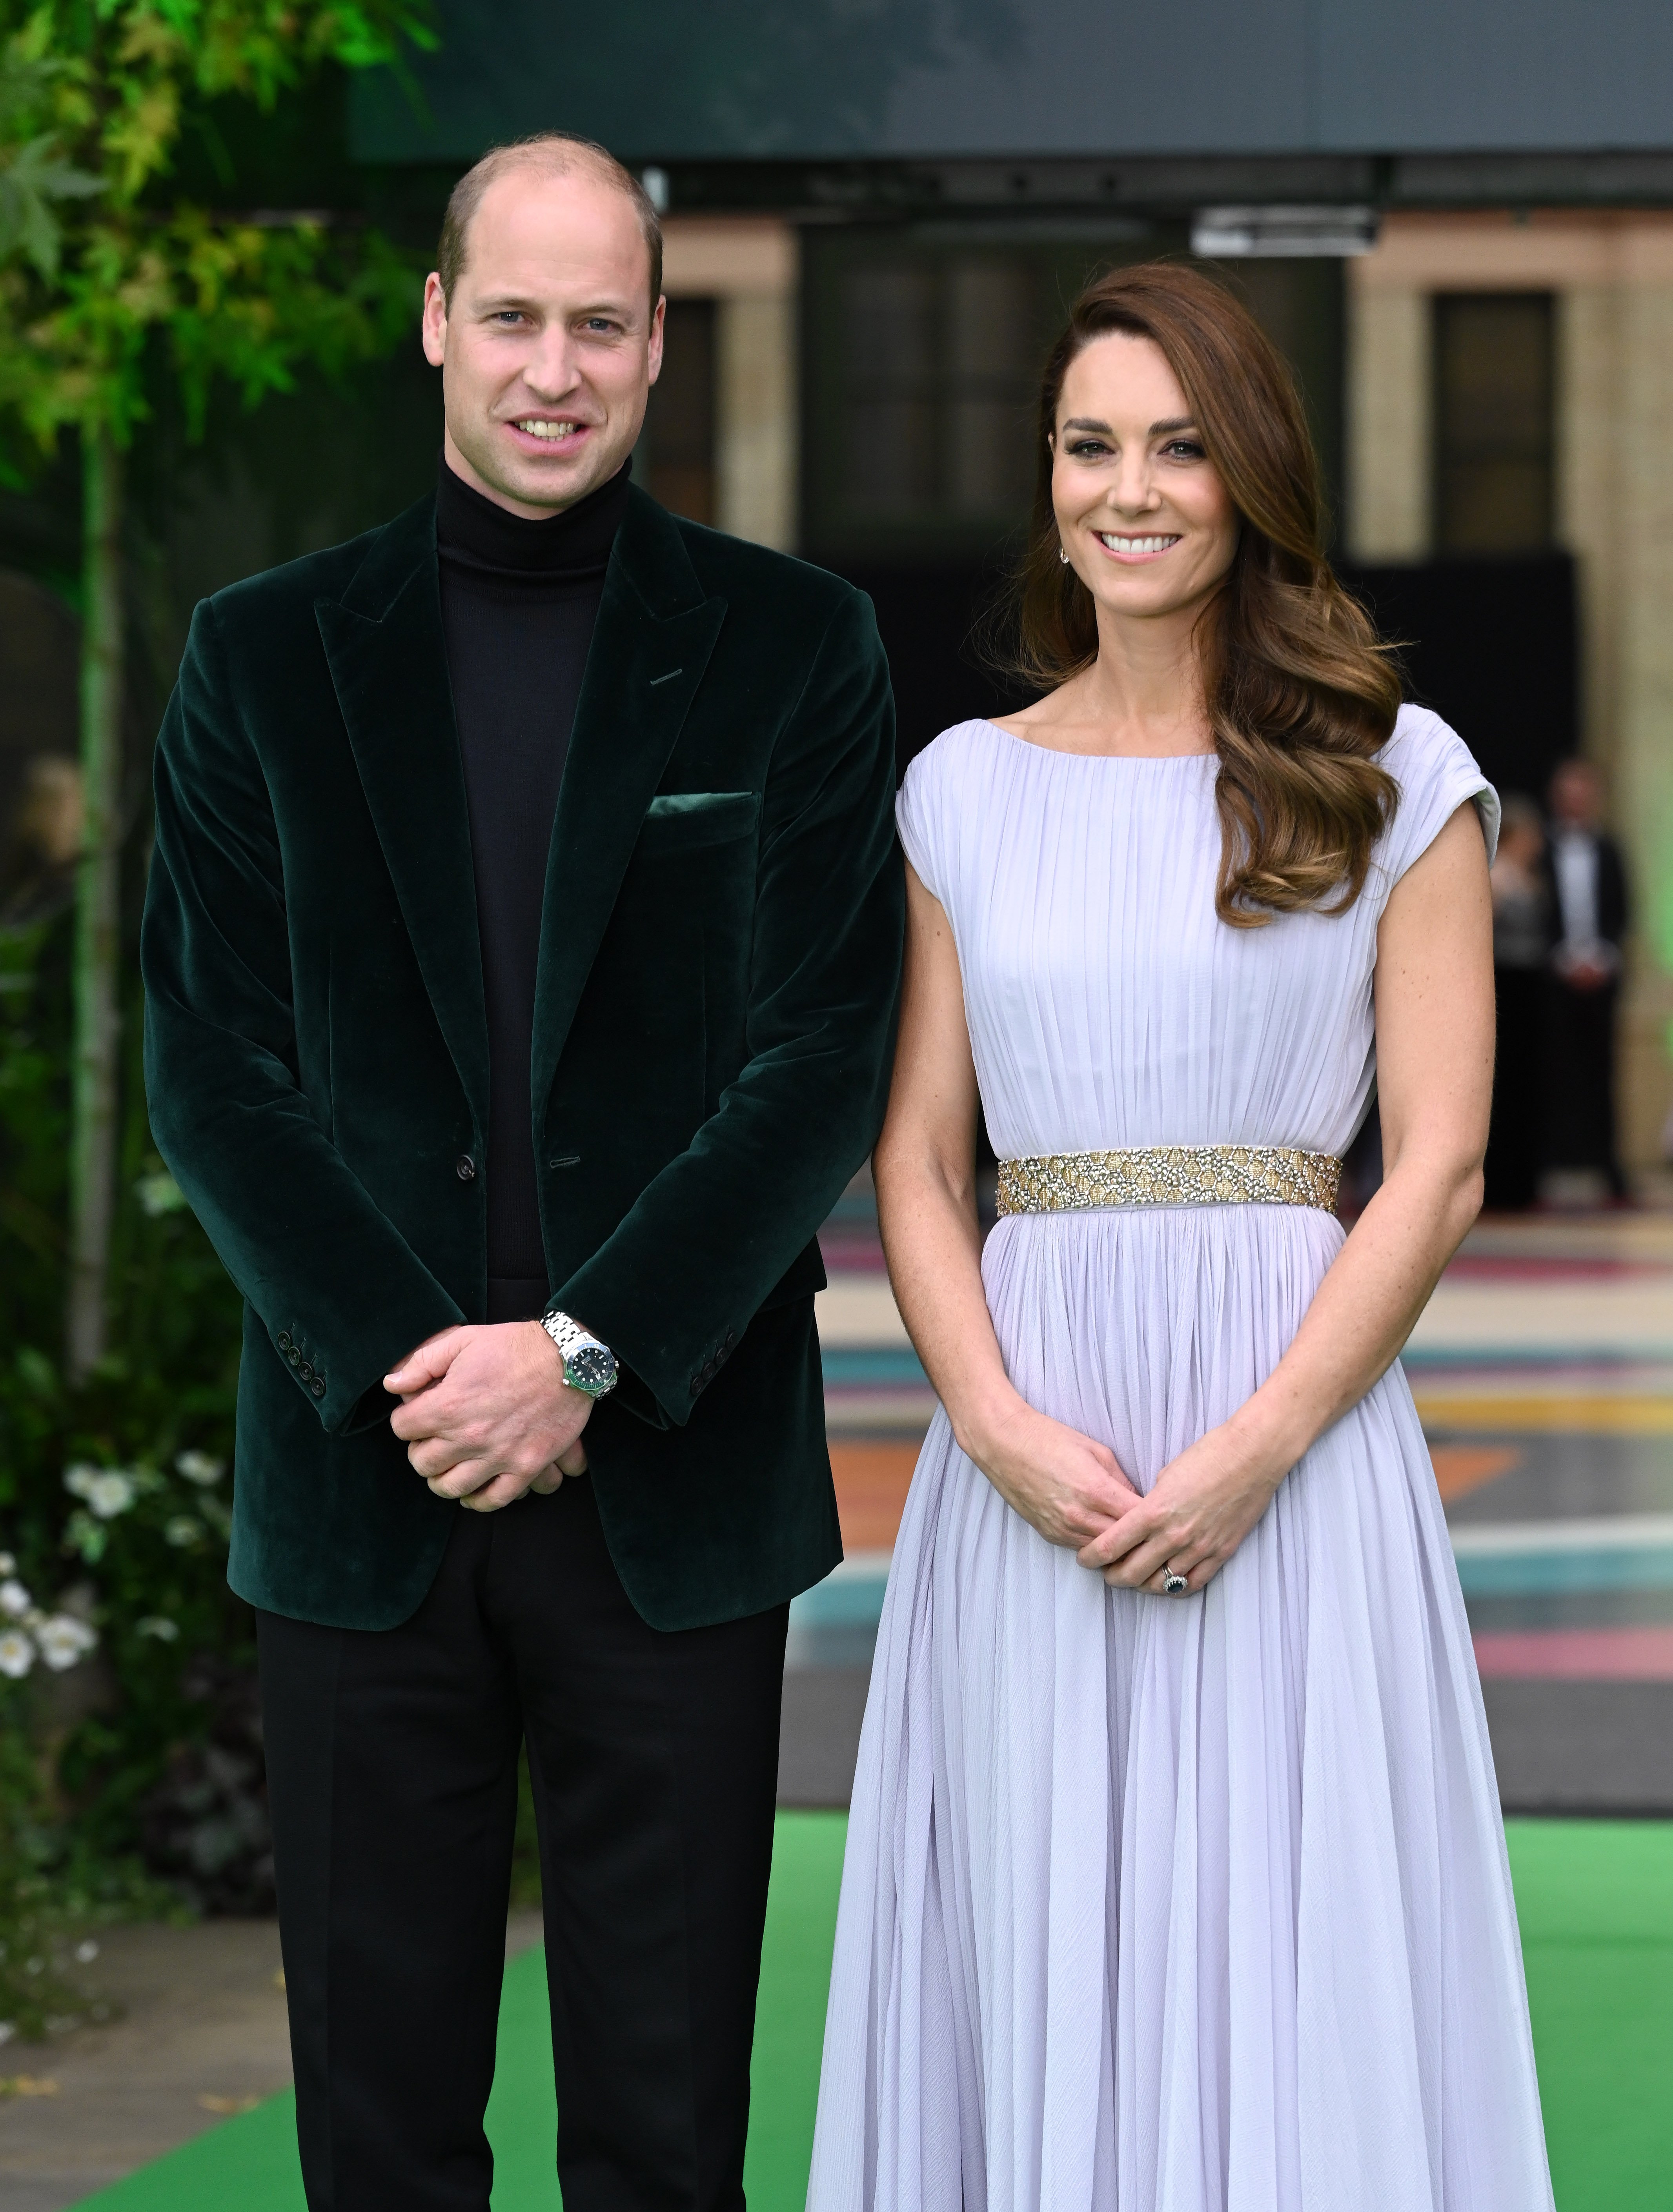 Prince William, Duke of Cambridge and Kate Middleton, Duchess of Cambridge during the Earthshot Prize 2021 at Alexandra Palace on October 17, 2021 in London, England. / Source: Getty Images